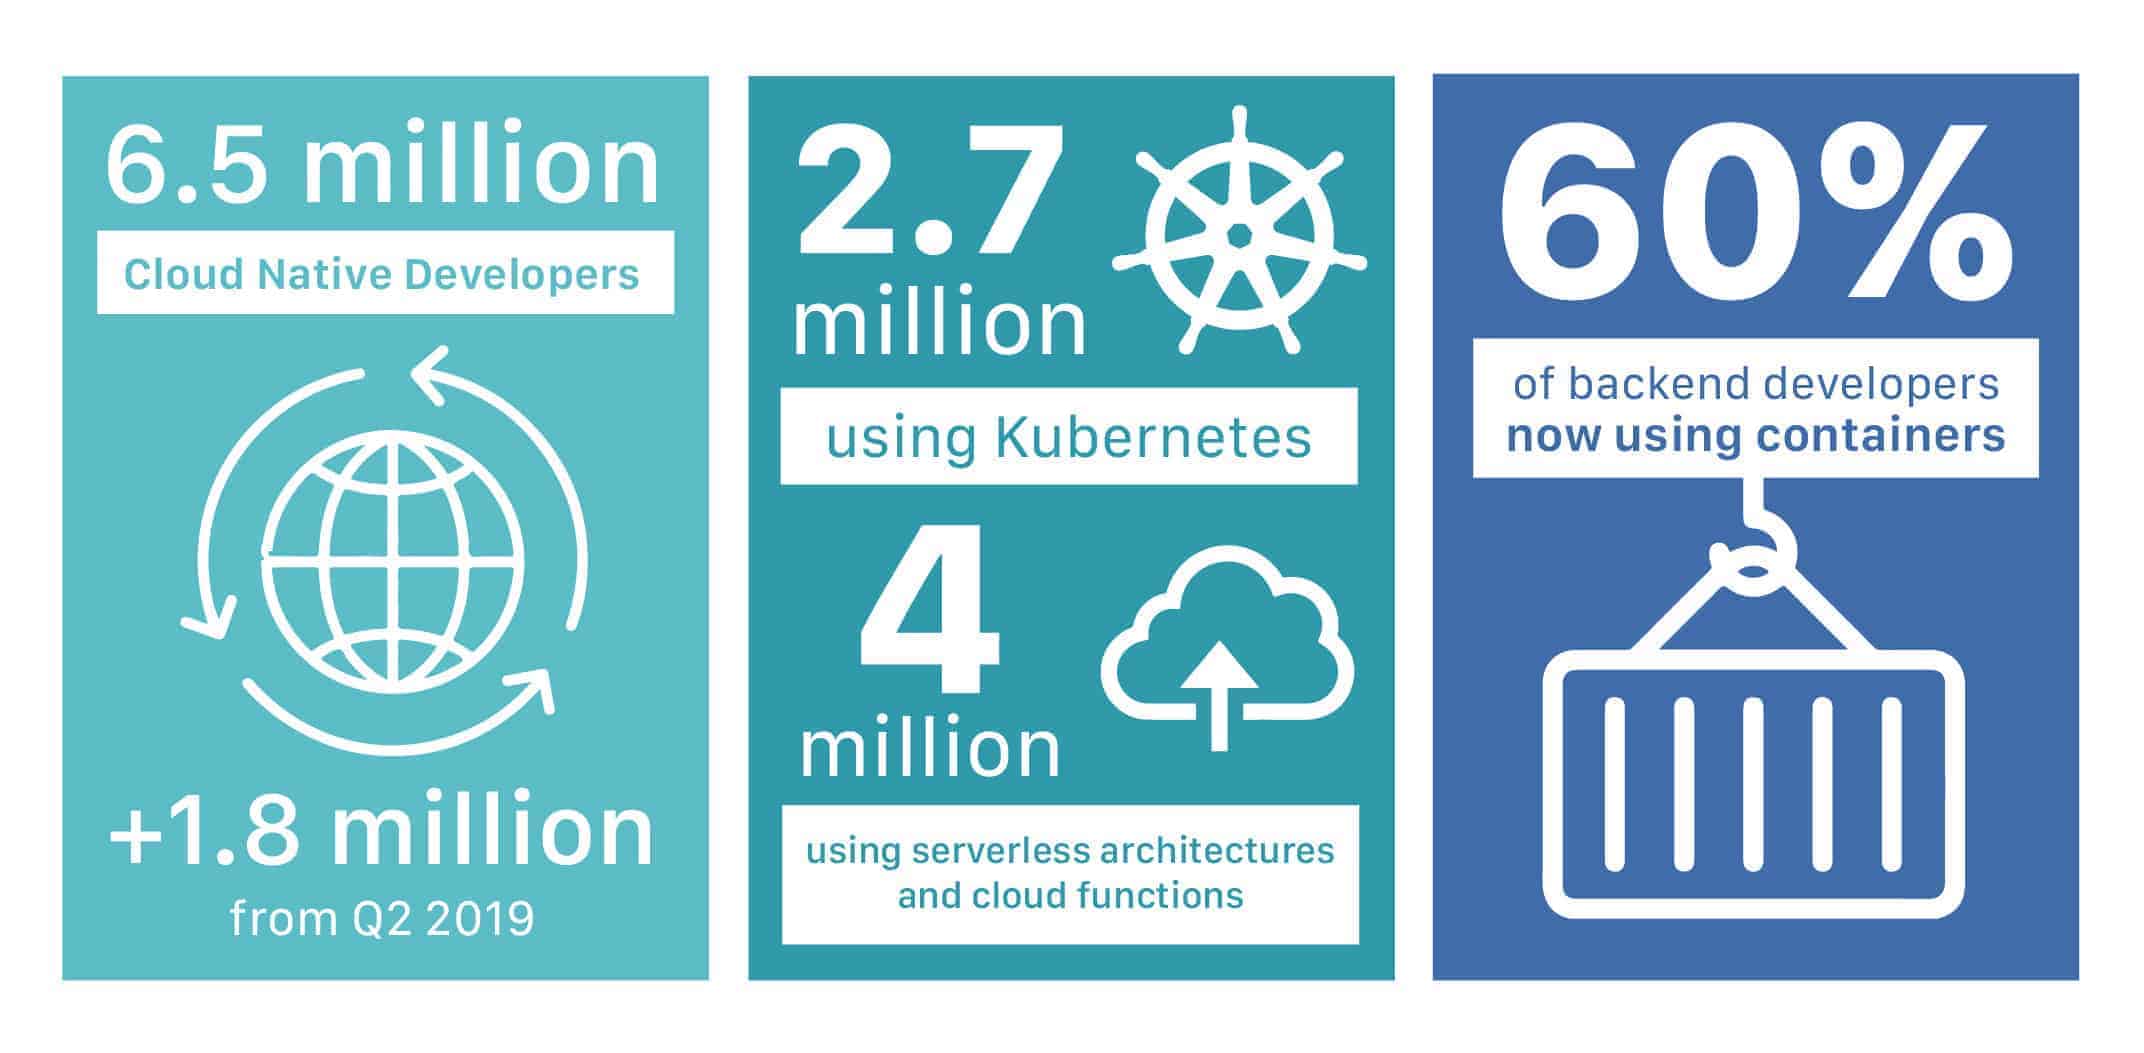 State of Cloud Native Development Report reports there are 6.5 million cloud native developers, +1.8 million from Q2 2019, 1.7 million using Kubernetes, 4 million using serverless architectures and cloud functions, 60% of backend developers now using containers